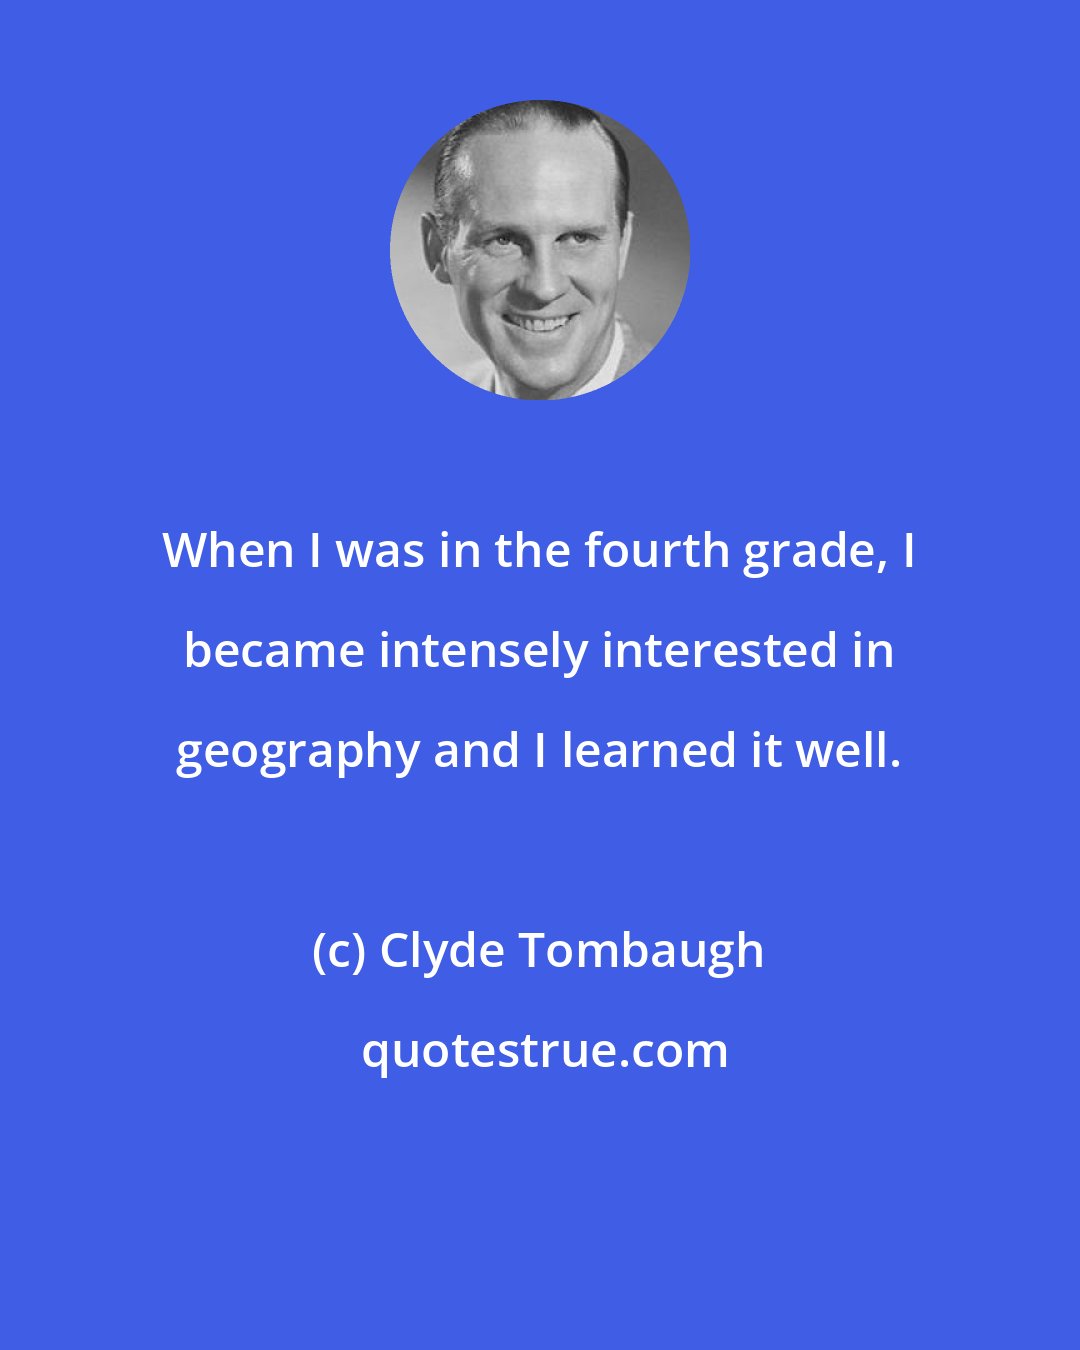 Clyde Tombaugh: When I was in the fourth grade, I became intensely interested in geography and I learned it well.